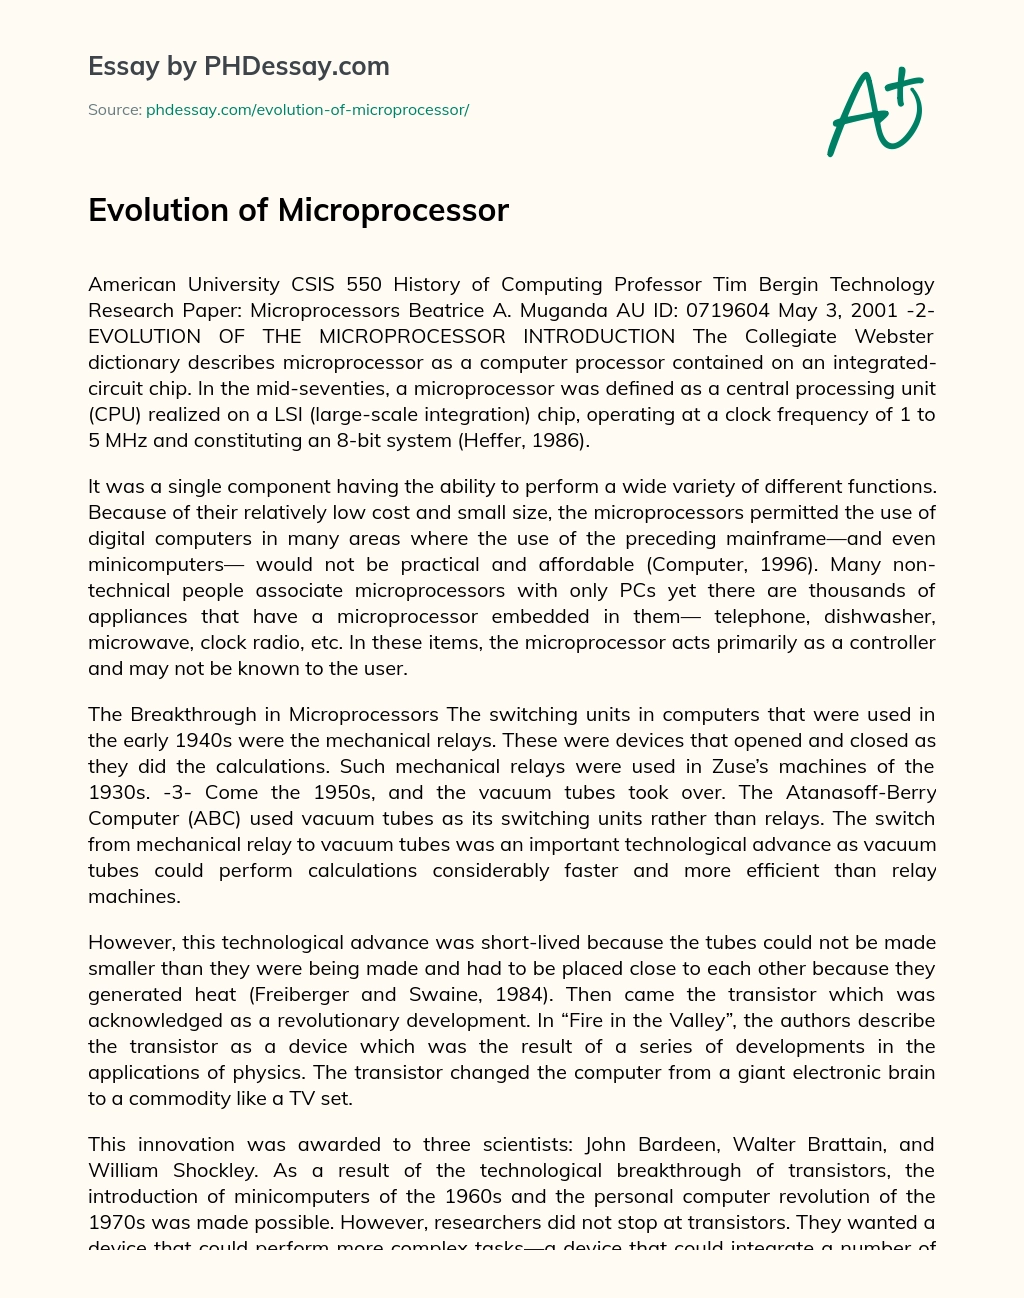 Реферат: Microprocessors Essay Research Paper The newest version